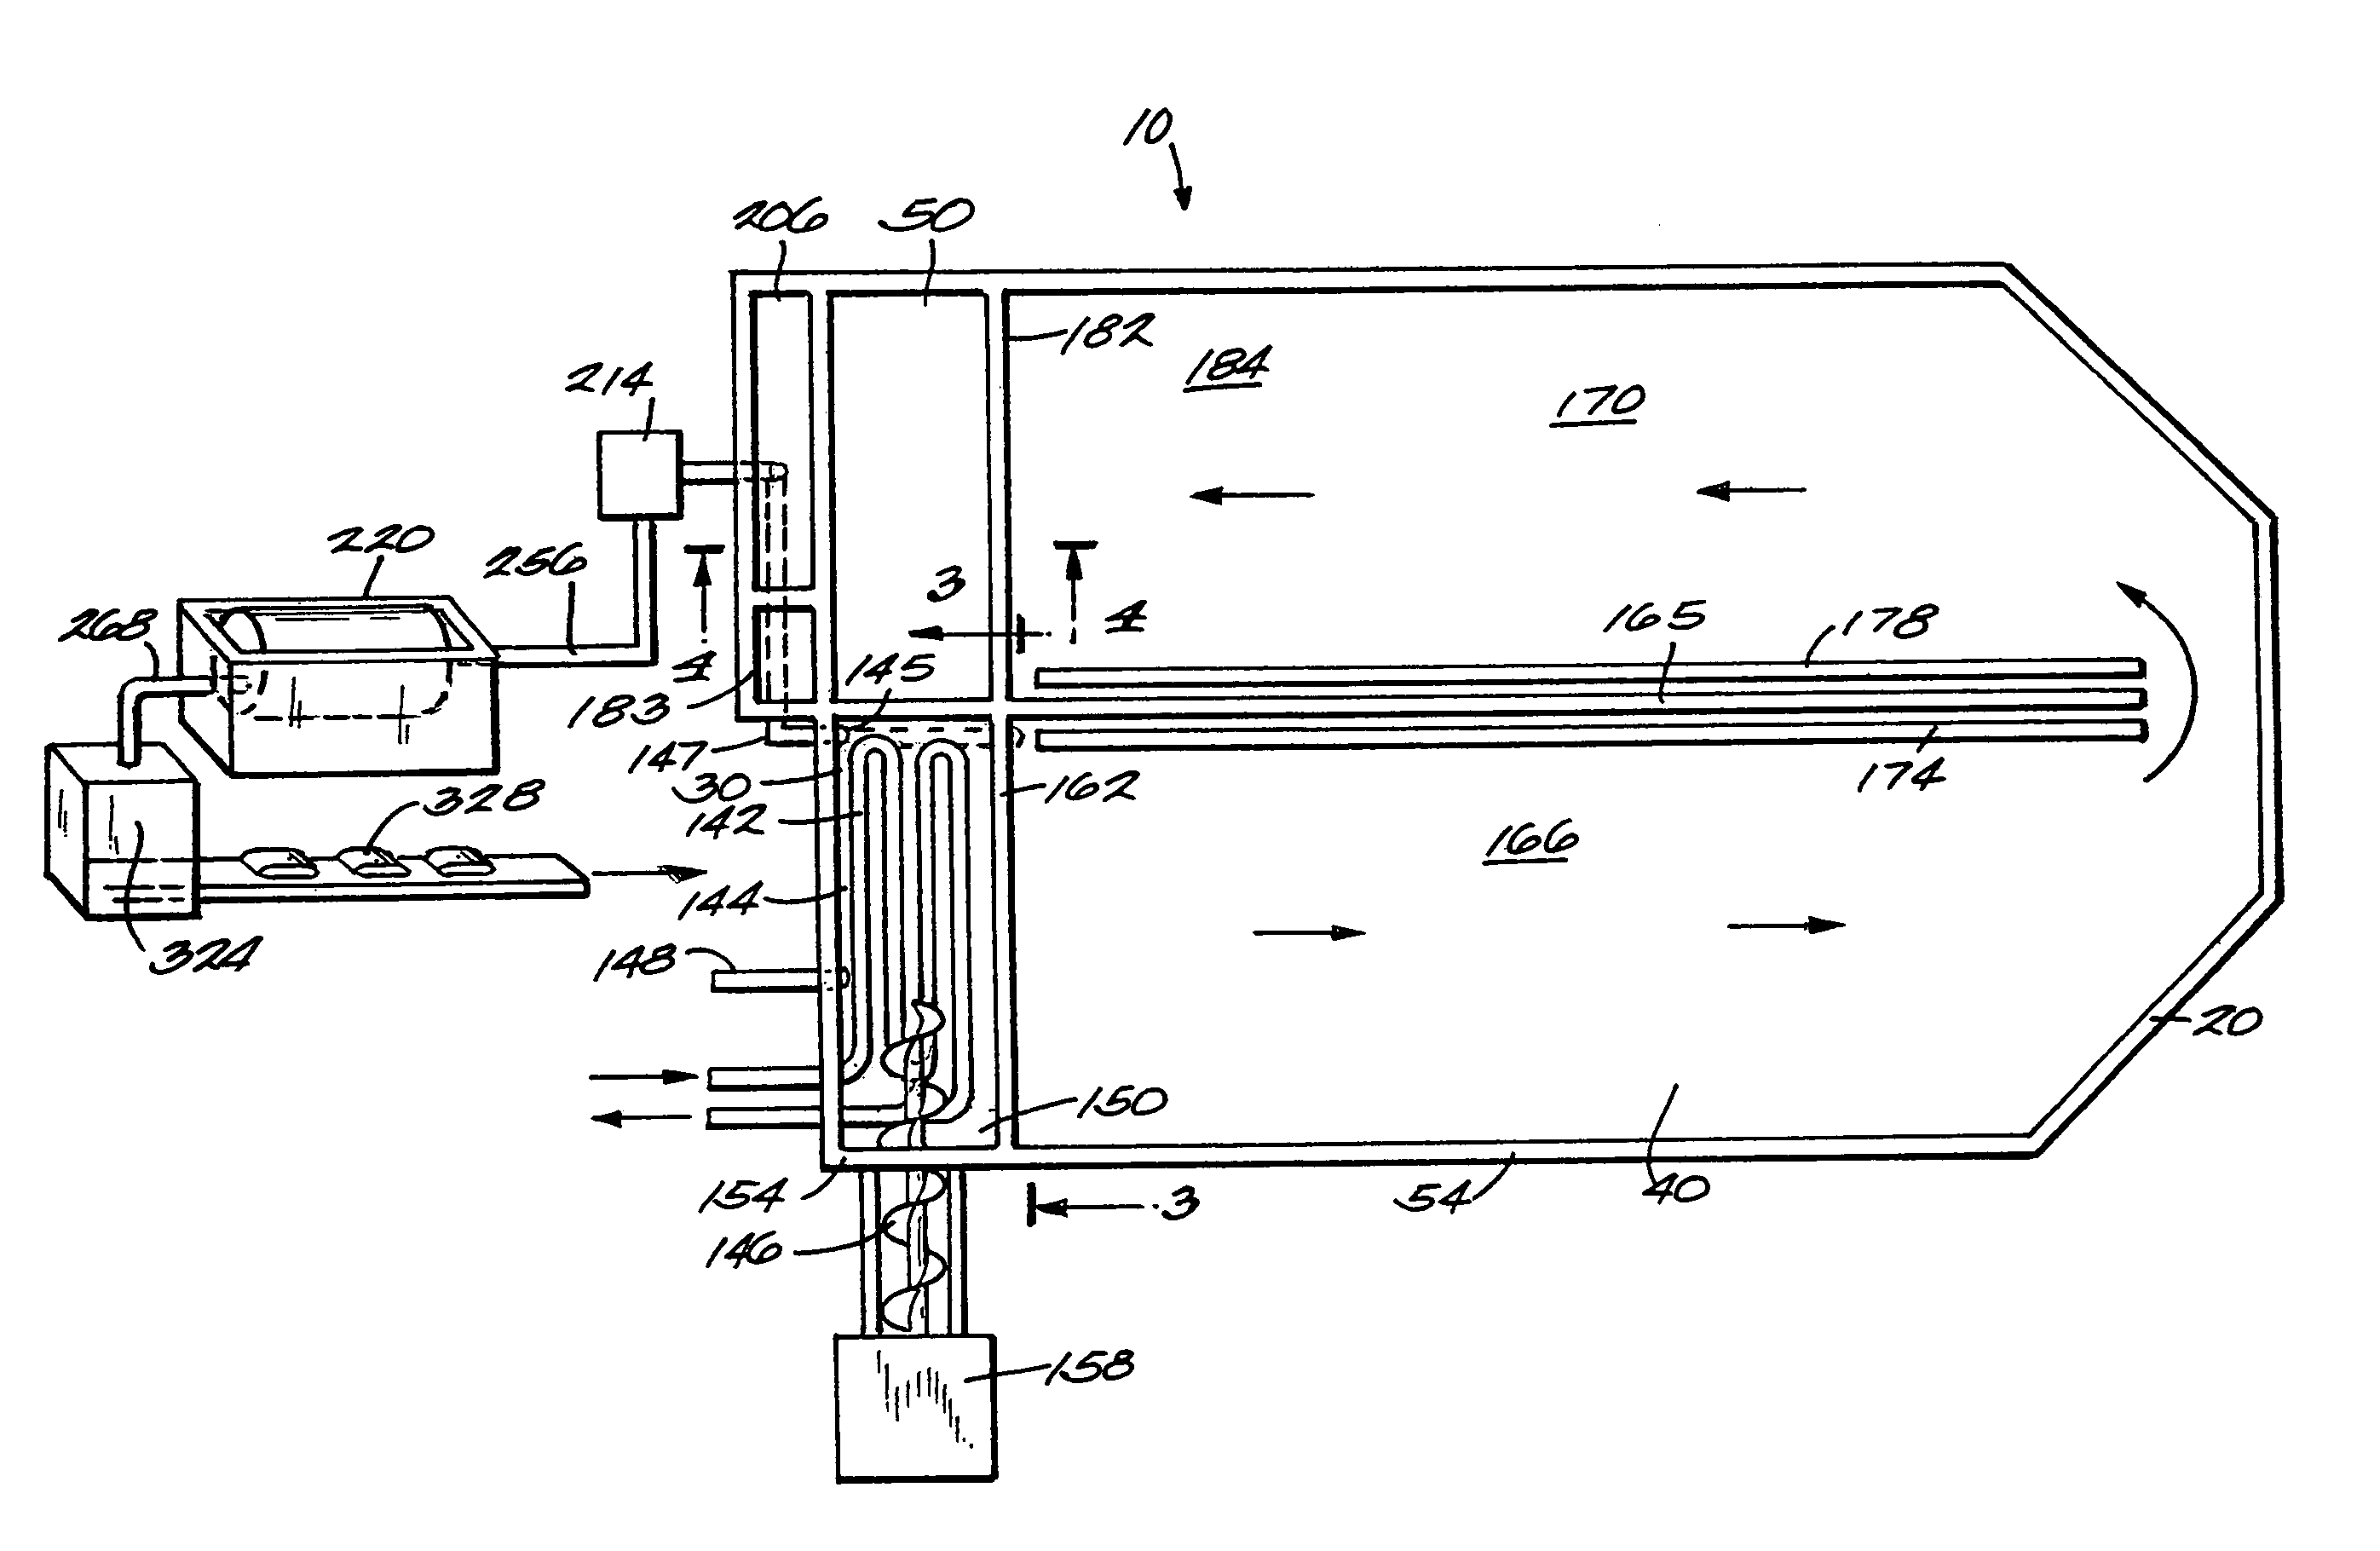 Method and apparatus for solids processing